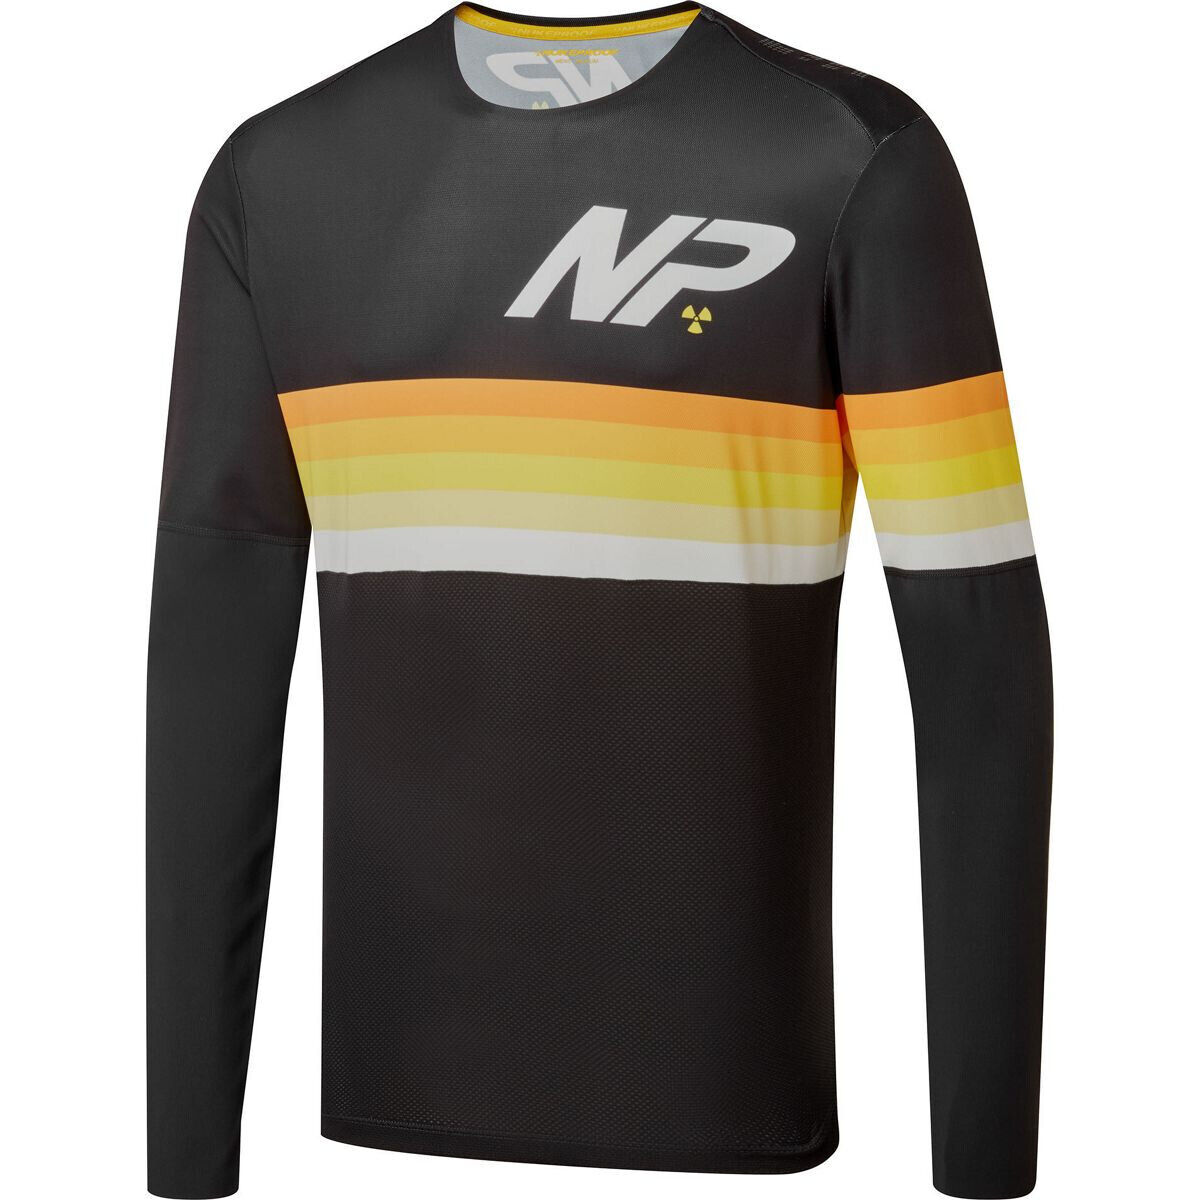 Nukeproof Blackline Race Long Sleeve JerseyThe Ultimate in trail/ enduro jersey design? Using the finest high-performance fabrics, the Nukeproof Blackline Race Long Sleeve Jersey elevates MTB Ridewear performance to the next level.

The Blackline Race Long Sleeve Jersey uses body mapping technology with highly breathable and wicking Polartech ™ Powerdry ™ fabric on the upper part of the jersey to keep you dry, with Polartech ™ Delta ™ to keep you cool. Not only that the sleeves use tough yet super lightweight Cordura™ to fend of trail debris and added toughness. Lastly, an anti-bacterial finish helps prevent nasty niffs after a day of hard riding.

A welded neck, flatlock and cover stitches (where required) ensure the 4-way stretch body gives the rider incredible comfort, even on the longest rides. Riding with a pack? The Race jersey is finished with silicone panels on the shoulders. This grips the pack straps and ensures it stays locked in place.